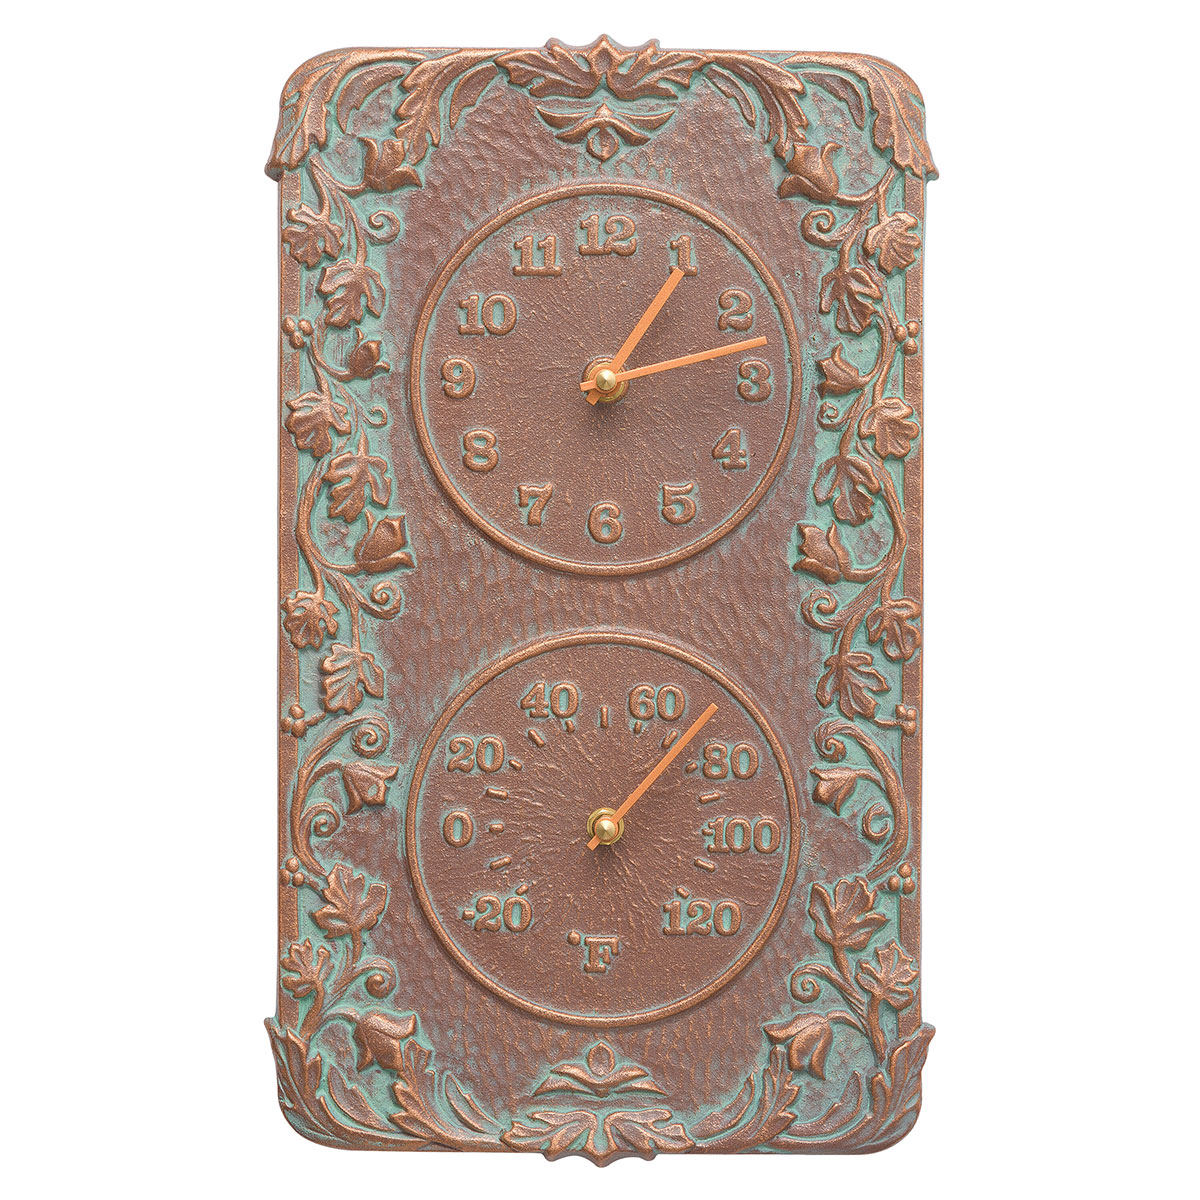 Woodland Tree Outdoor Wall Clock & Thermometer